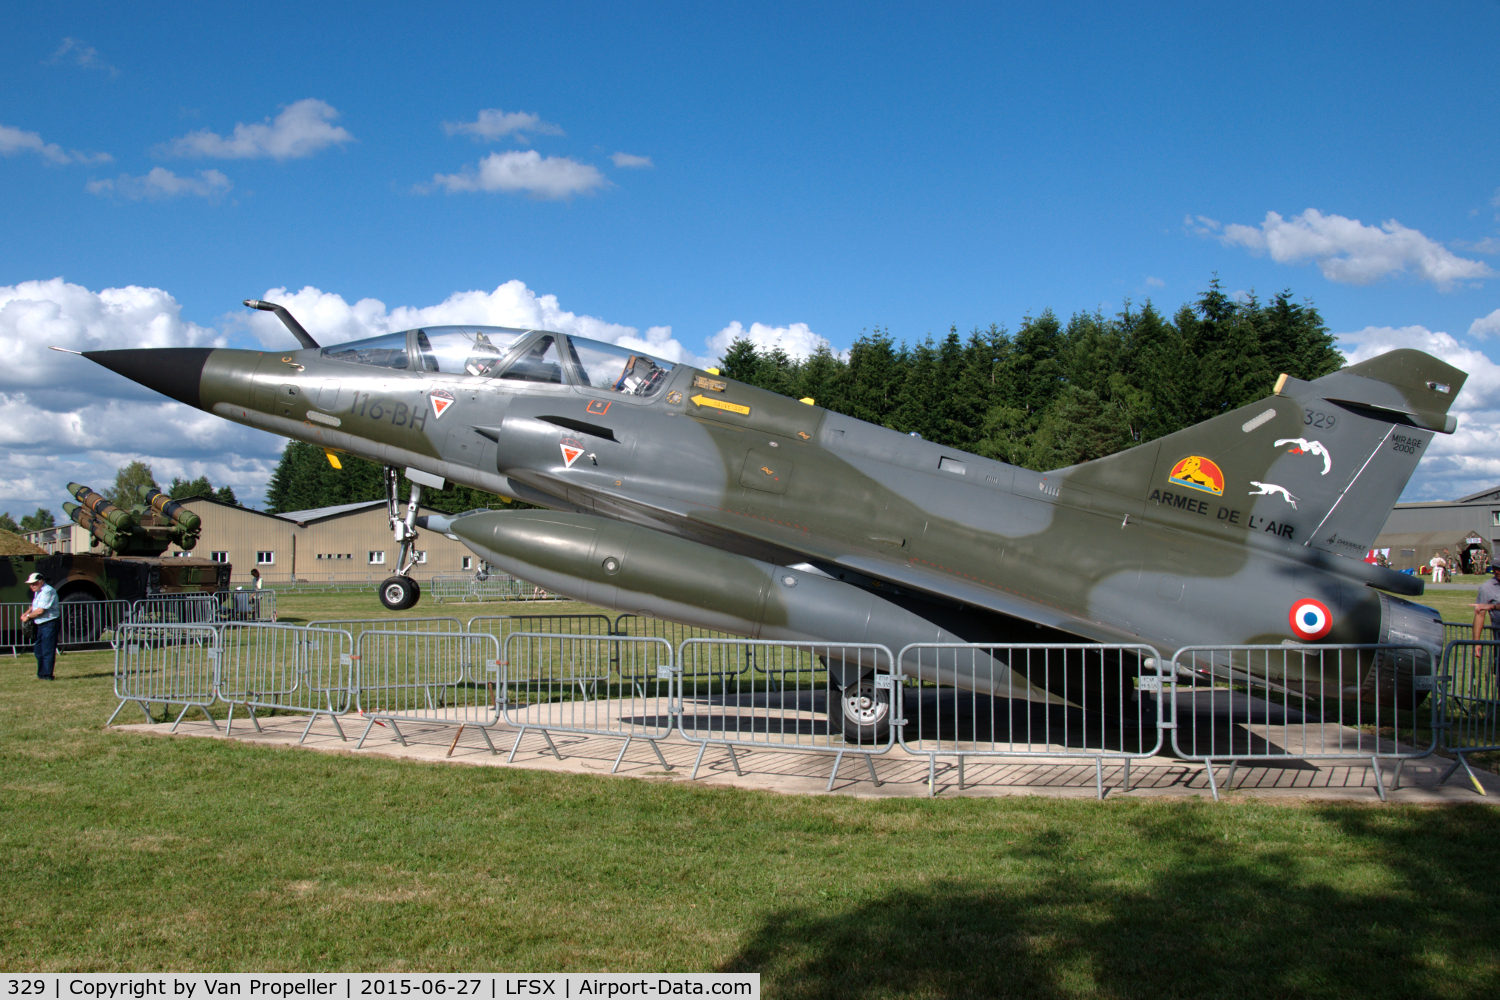 329, 1988 Dassault Mirage 2000N C/N 243, Dassault Mirage 2000N of the French Air Force preserved nose-up at Luxeuil Air Base.